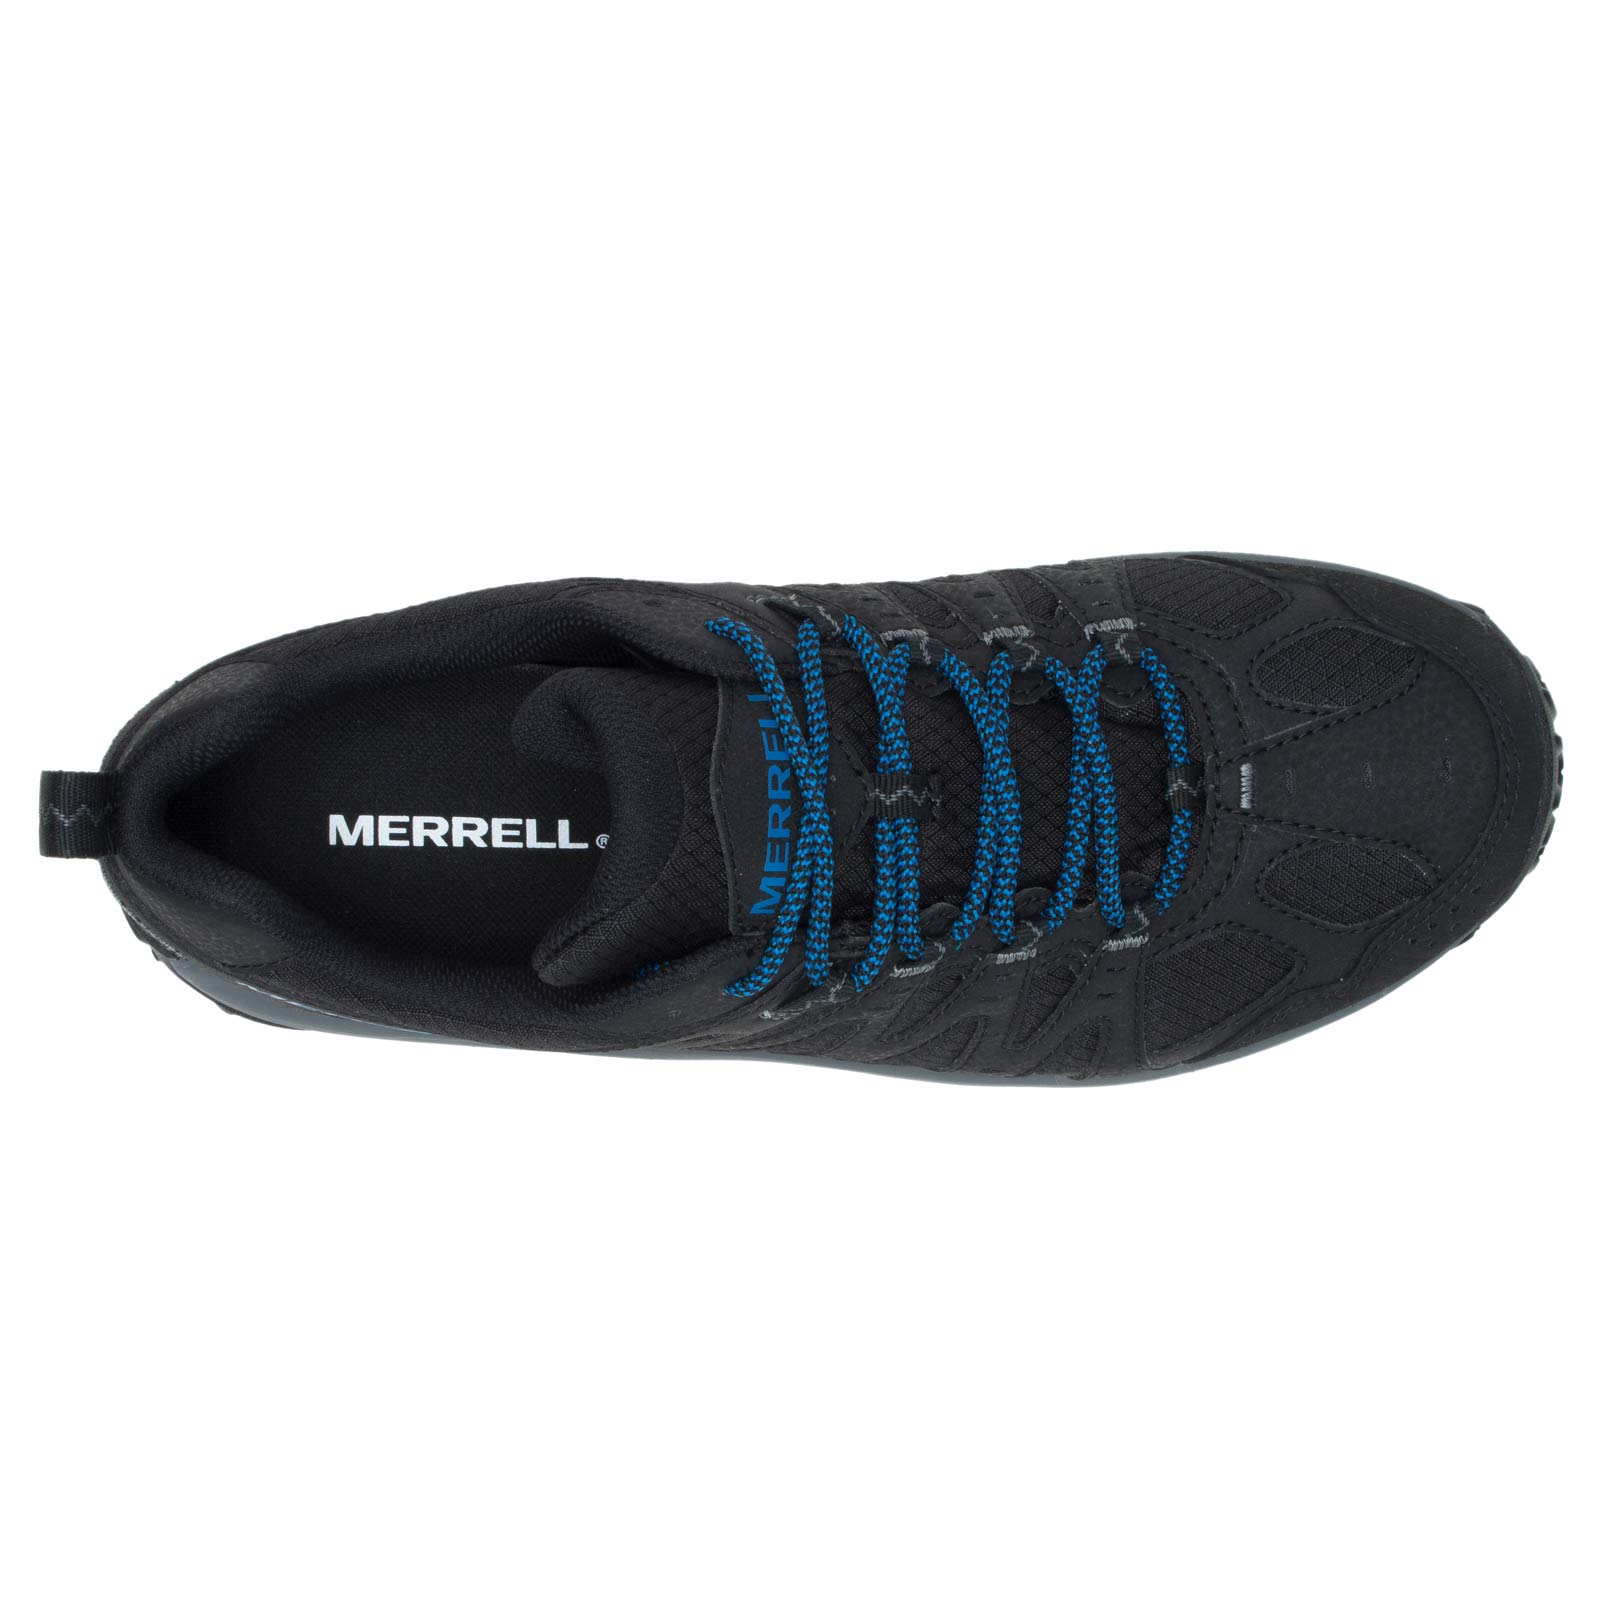 MERRELL ACCENTOR SPORT 3 GORE-TEX® MENS HIKING SHOES